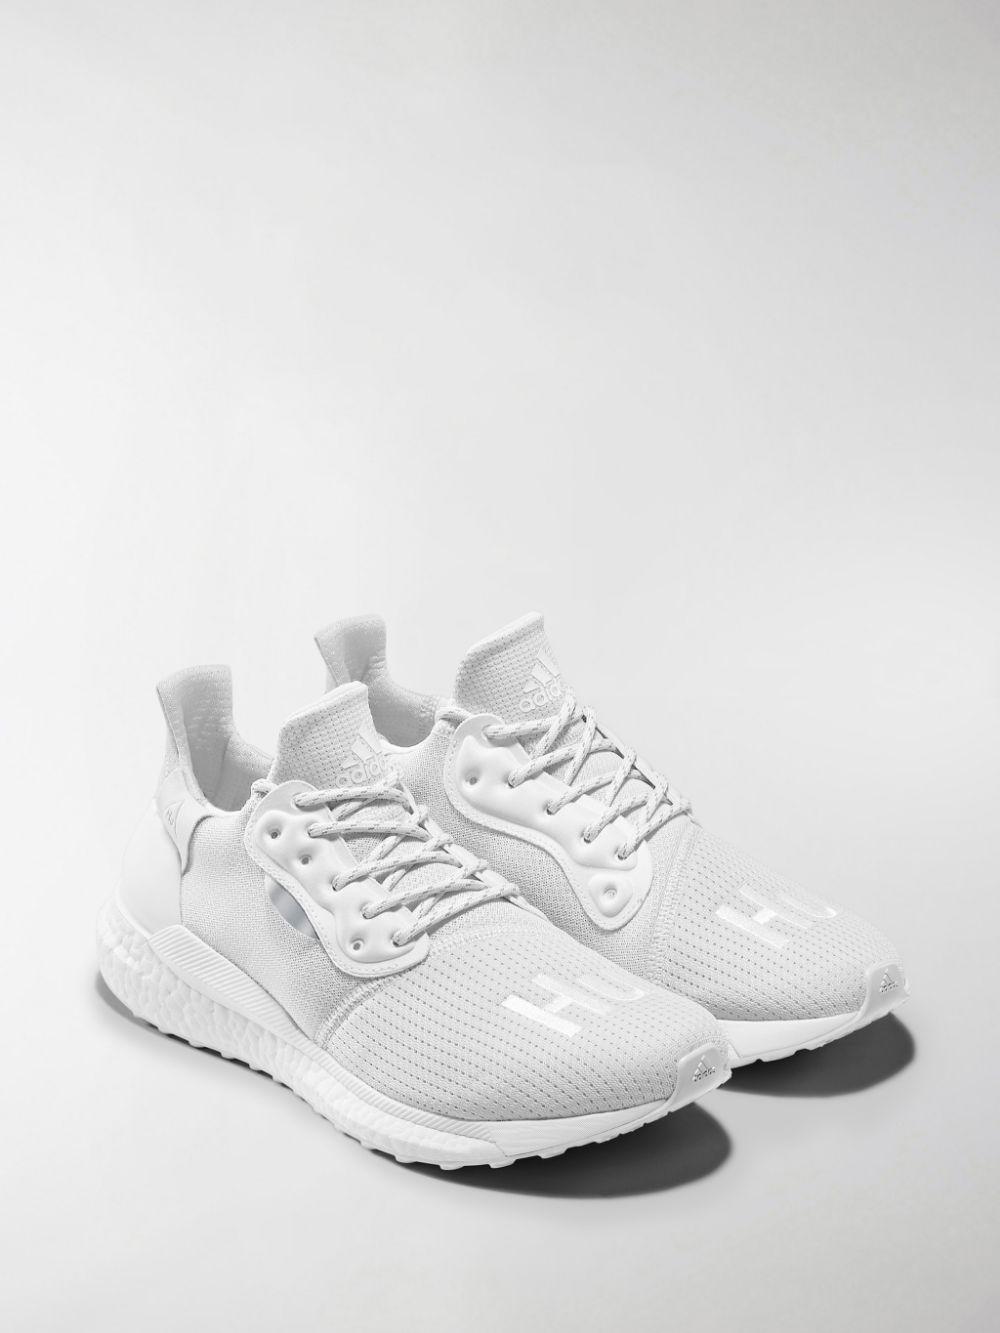 adidas Rubber X Pharrell Williams Solar Hu Proud Sneakers in White for Men  - Save 62% | Lyst